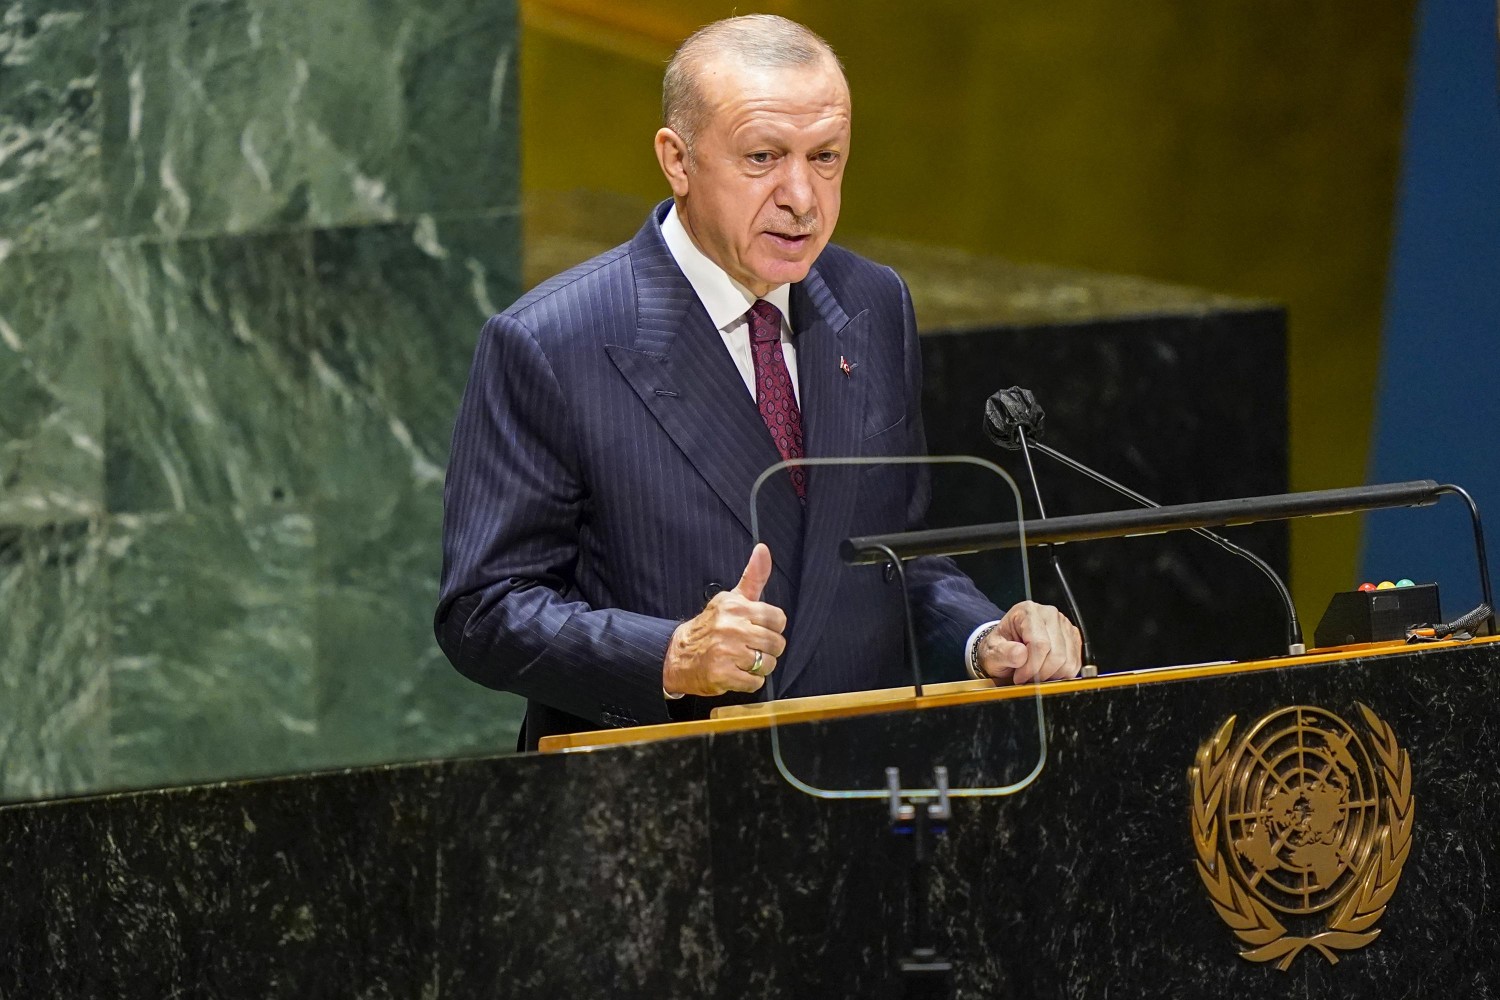 Turkish President Recep Tayyip Erdogan addresses the 76th Session of the United Nations General Assembly, Tuesday, Sept. 21, 2021 at U.N. headquarters. (AP Photo/Mary Altaffer, Pool)